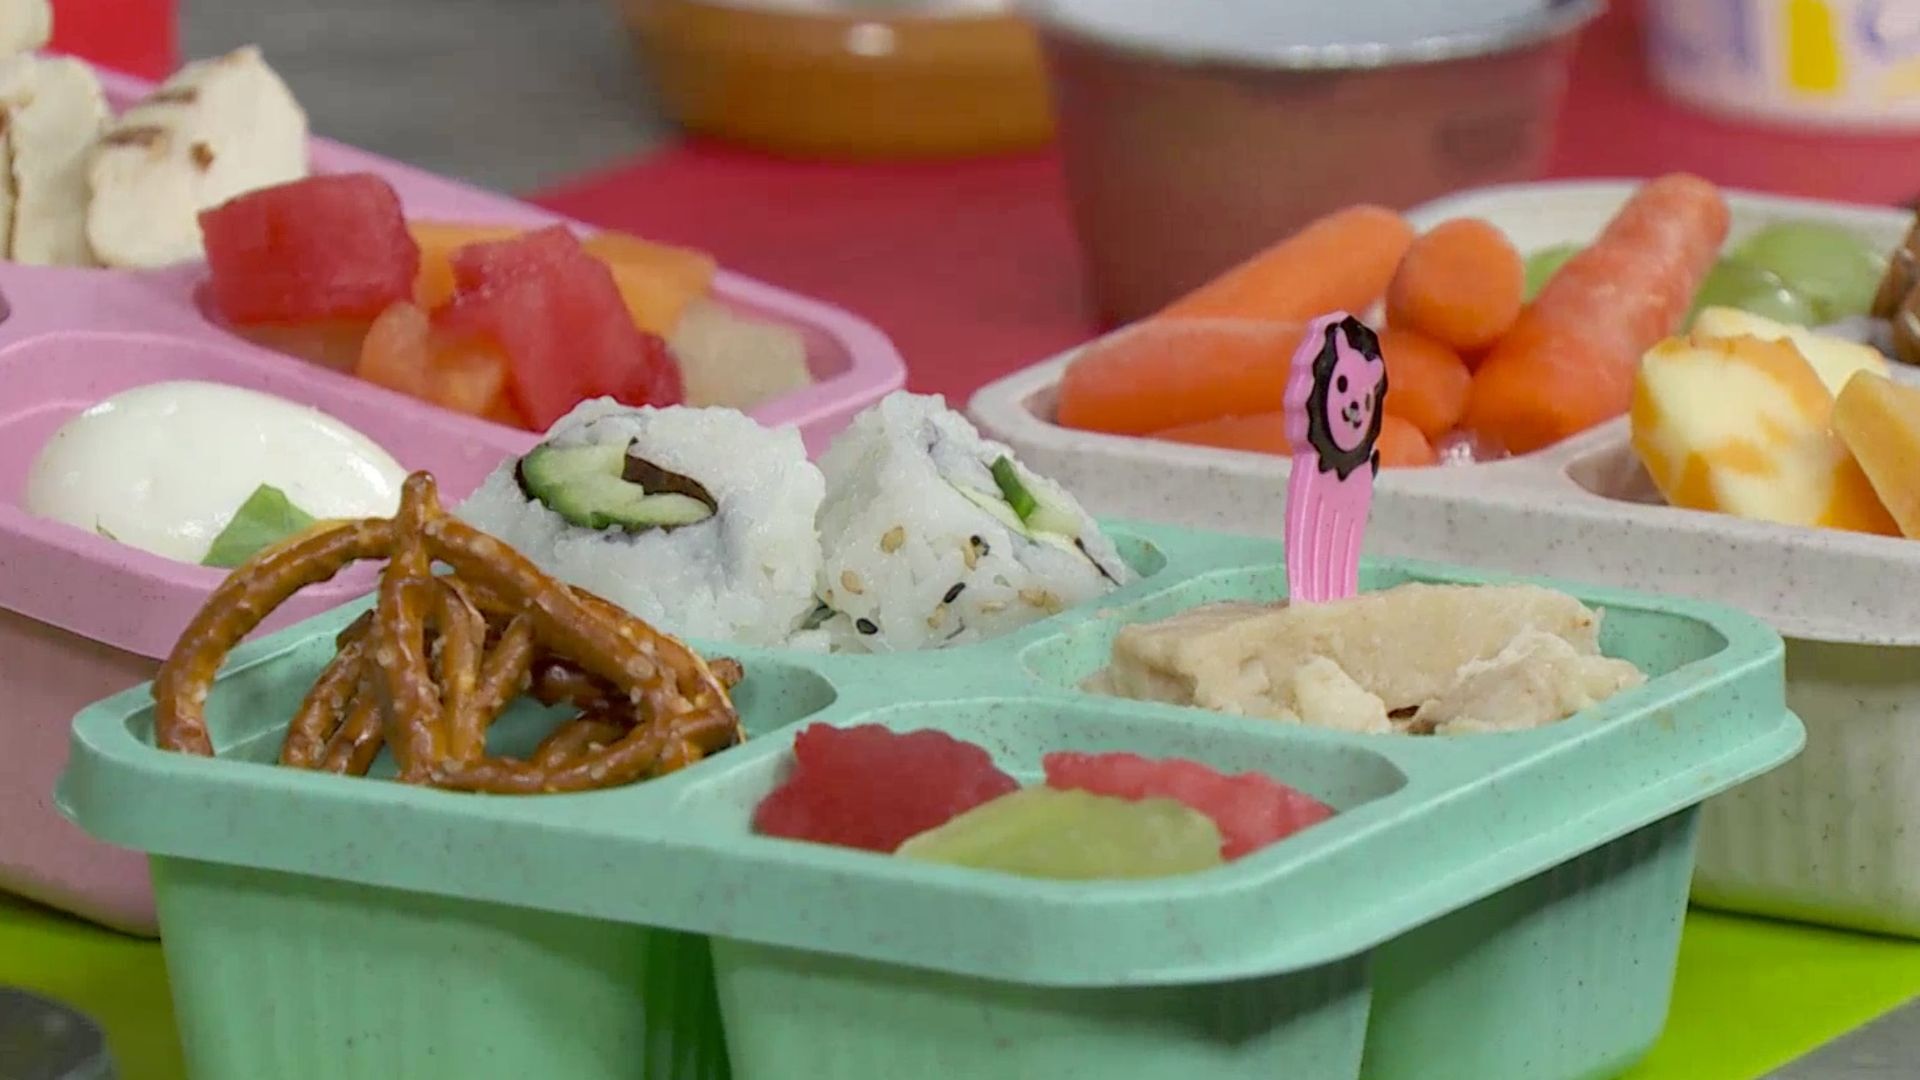 Make school lunches fun with these tips and tricks